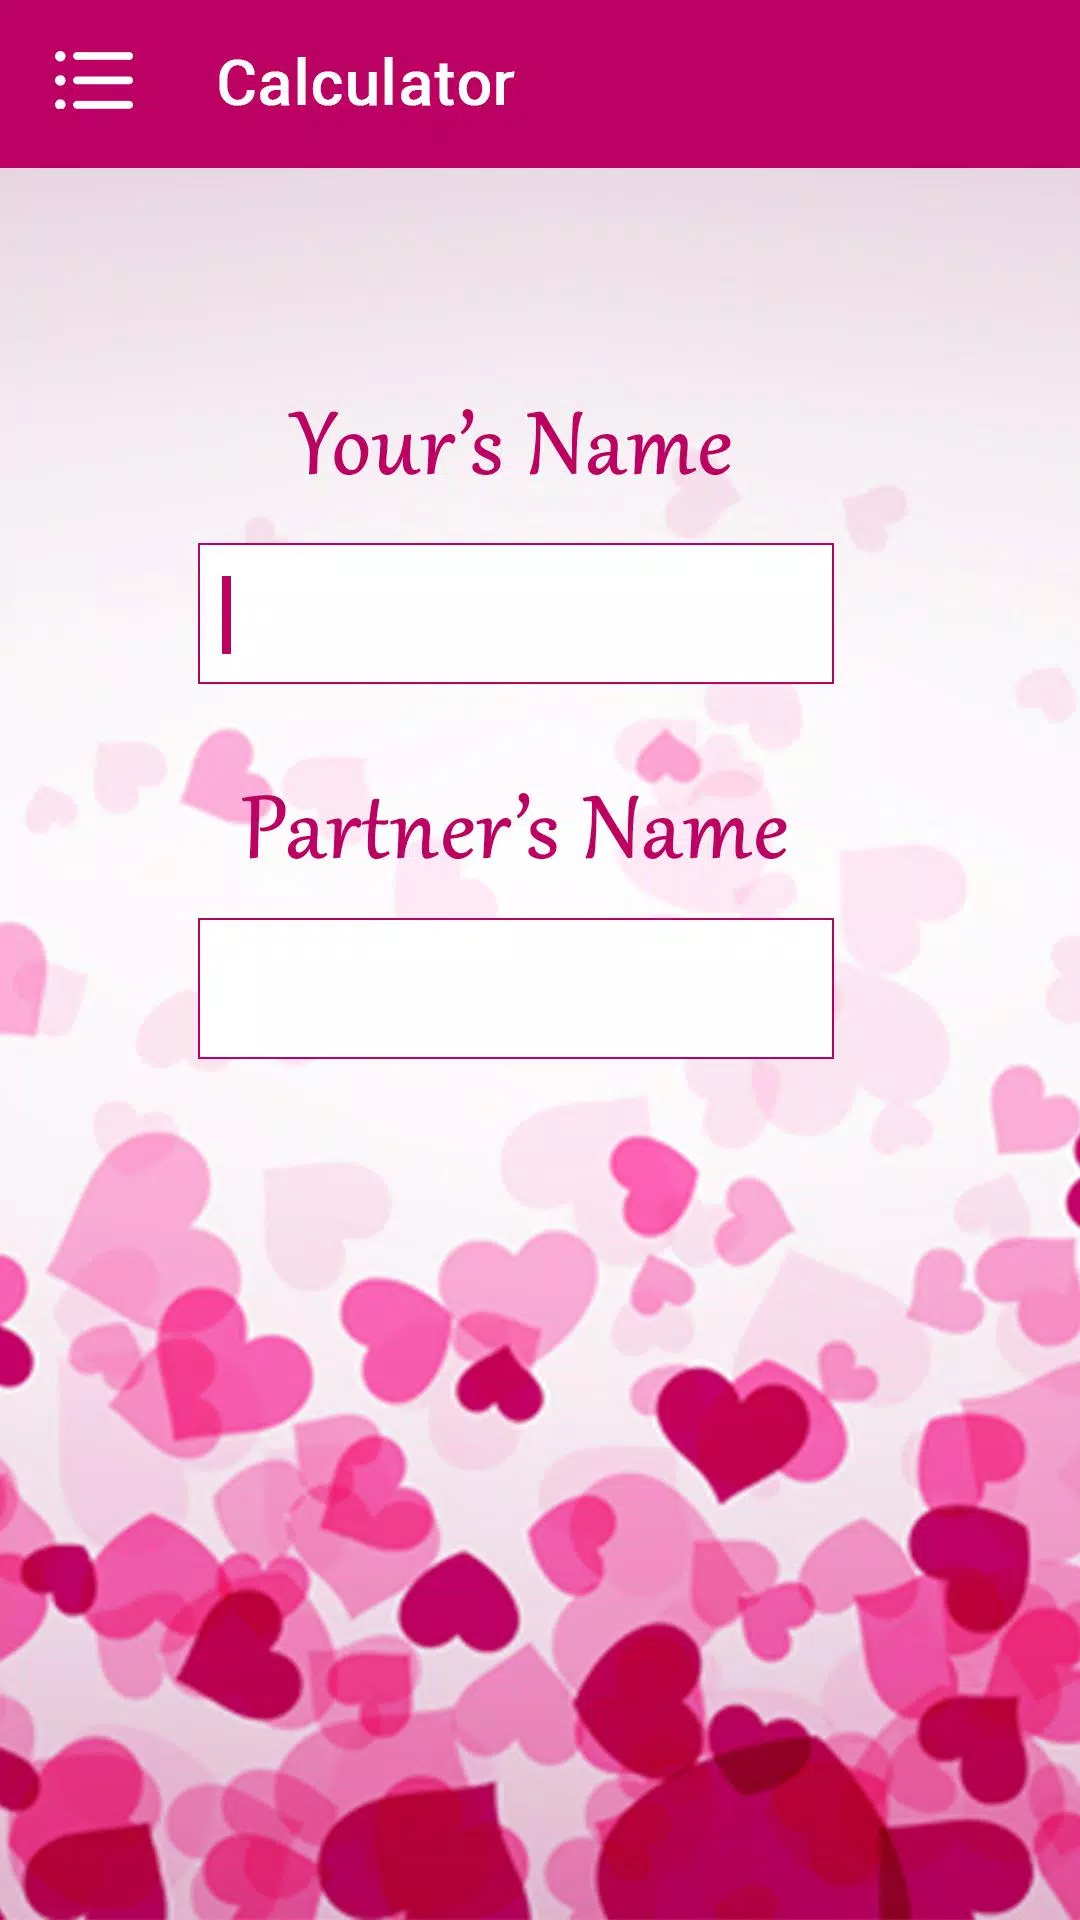 Real True Love Calculator - Real Love Test APK for Android Download